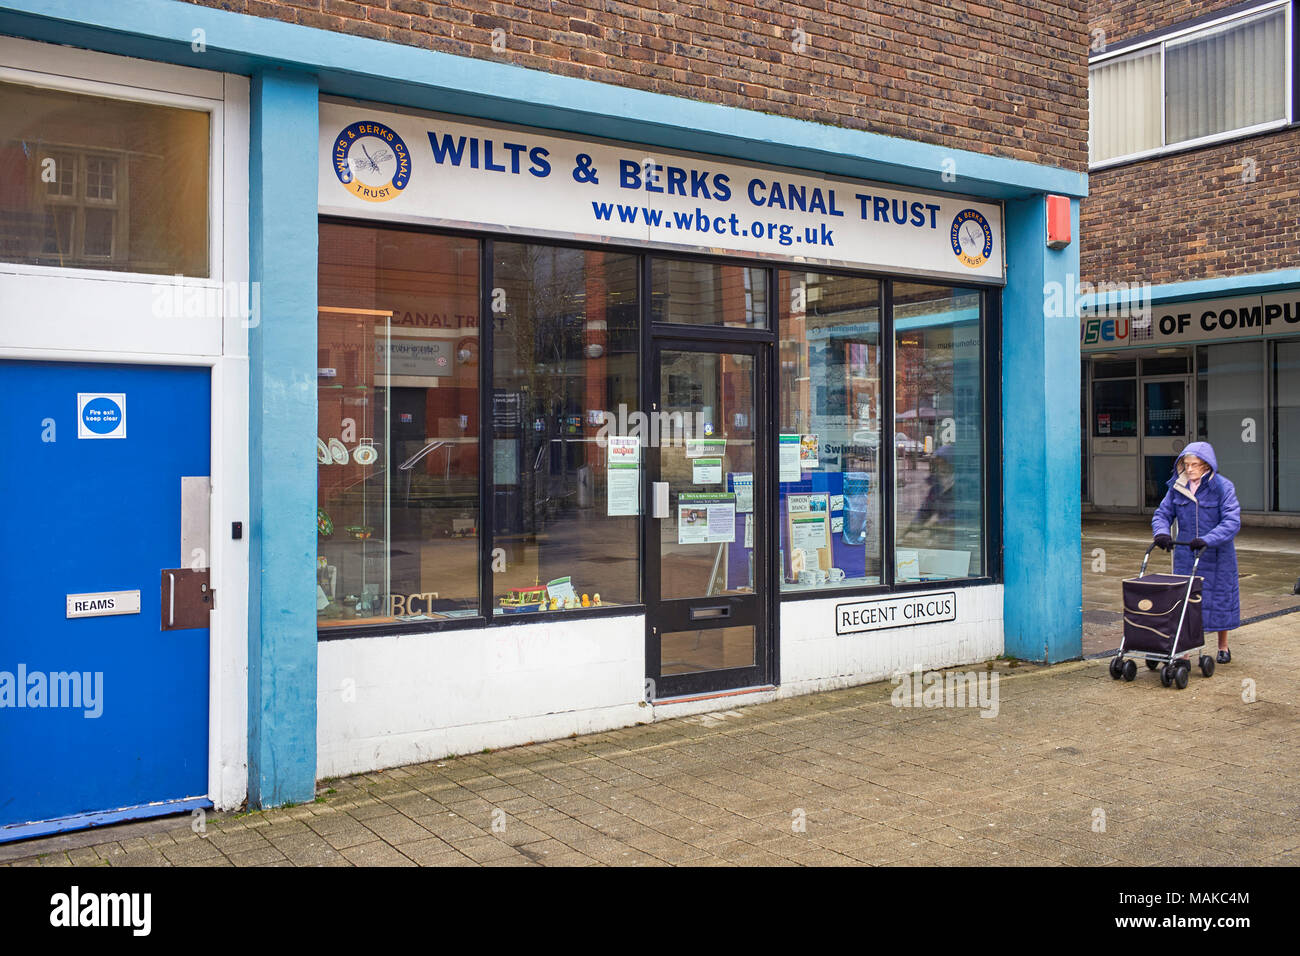 The Wilts & Berks canal trust shop in Swindon shopping centre Stock Photo